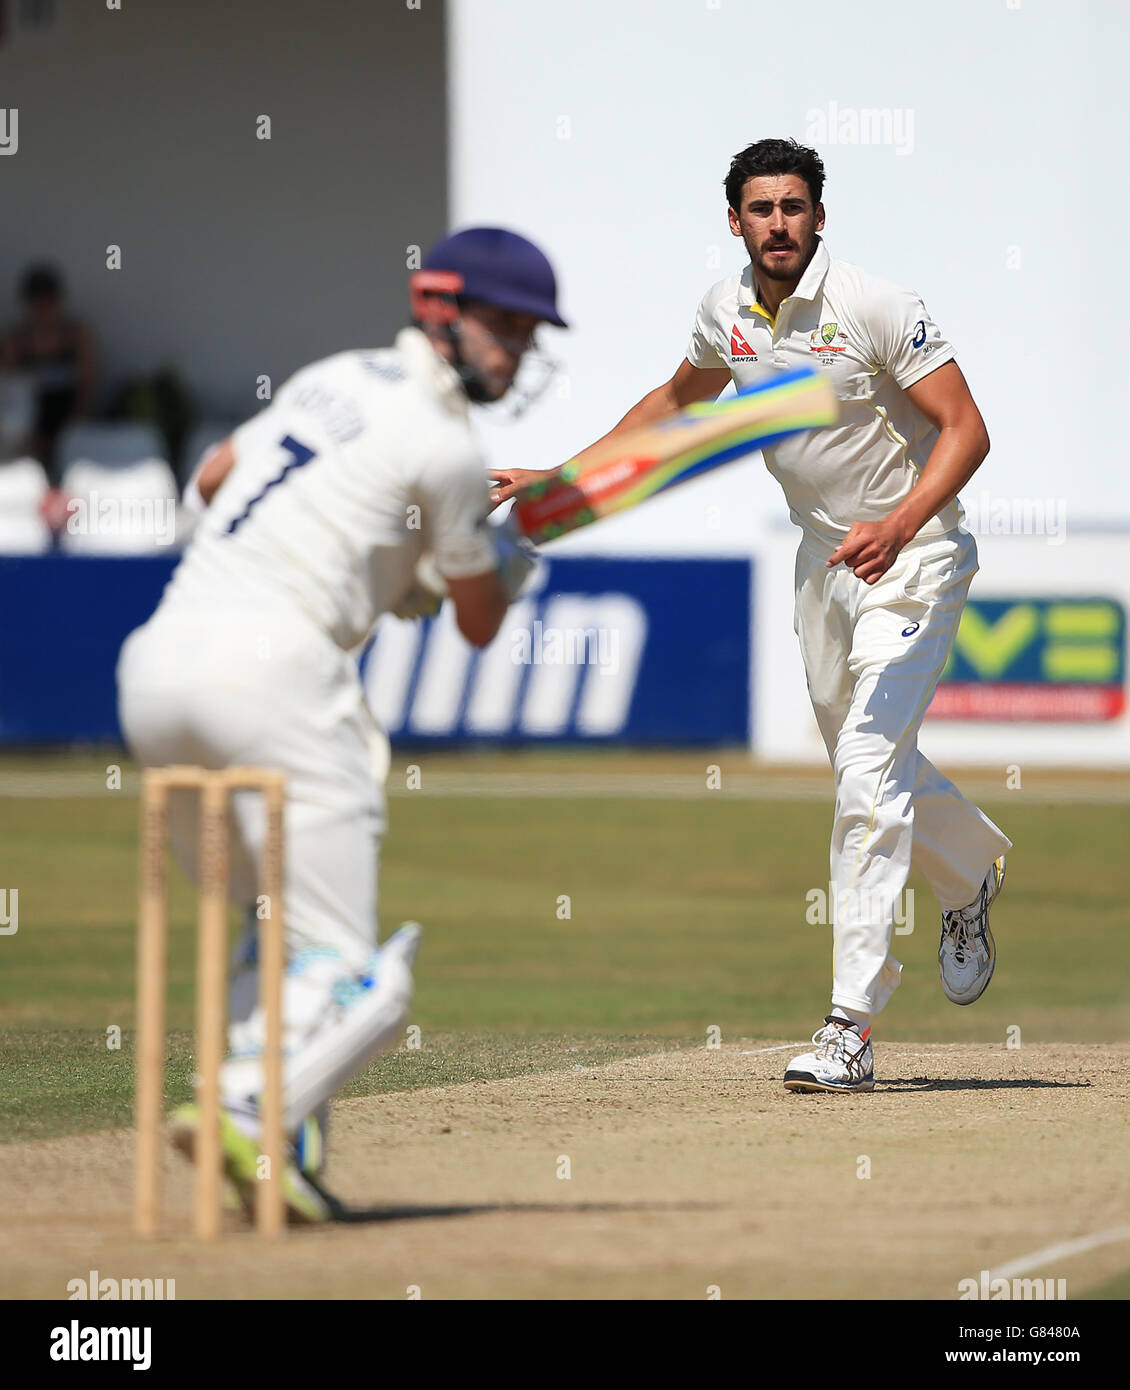 Australia's Mitchell Starc takes the wicket of Essex batsman James Foster caught by Michael Clarke in the slips during the tour match at the Essex County Ground, Chelmsford. Stock Photo